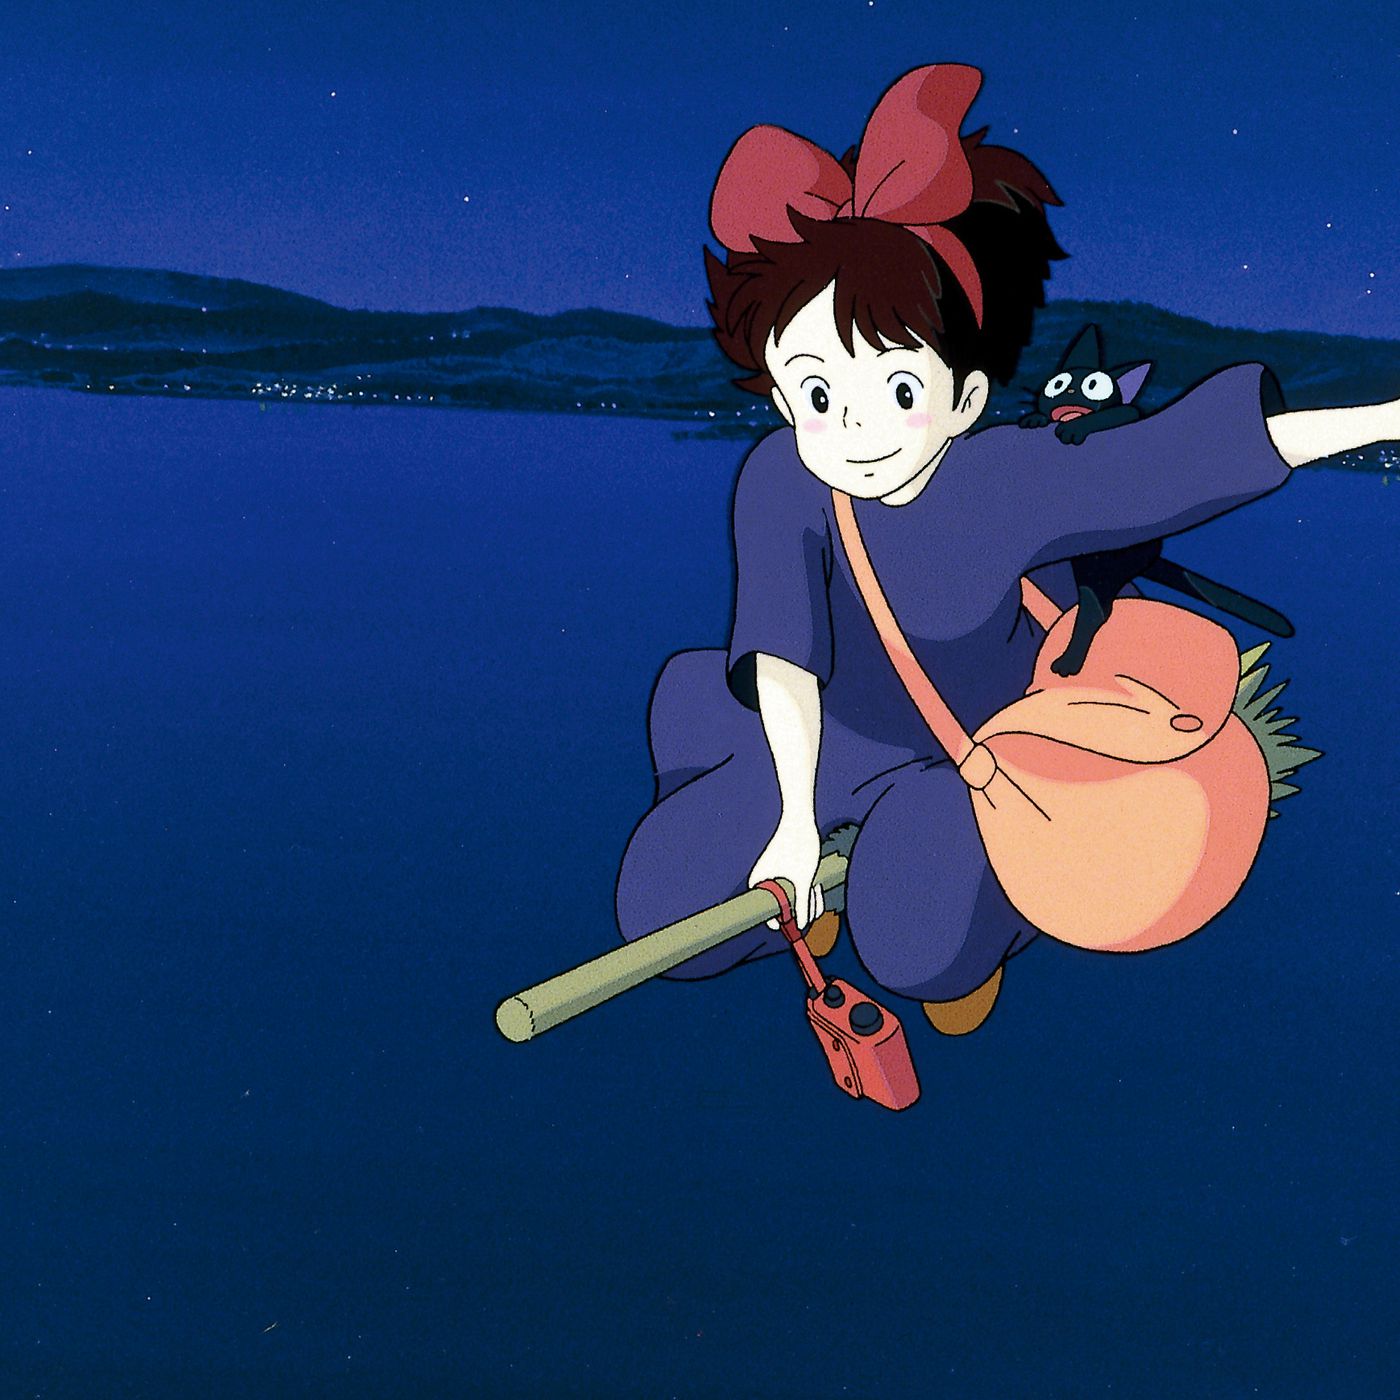 Kiki's Delivery Service and the profound loneliness of Studio Ghibli movies